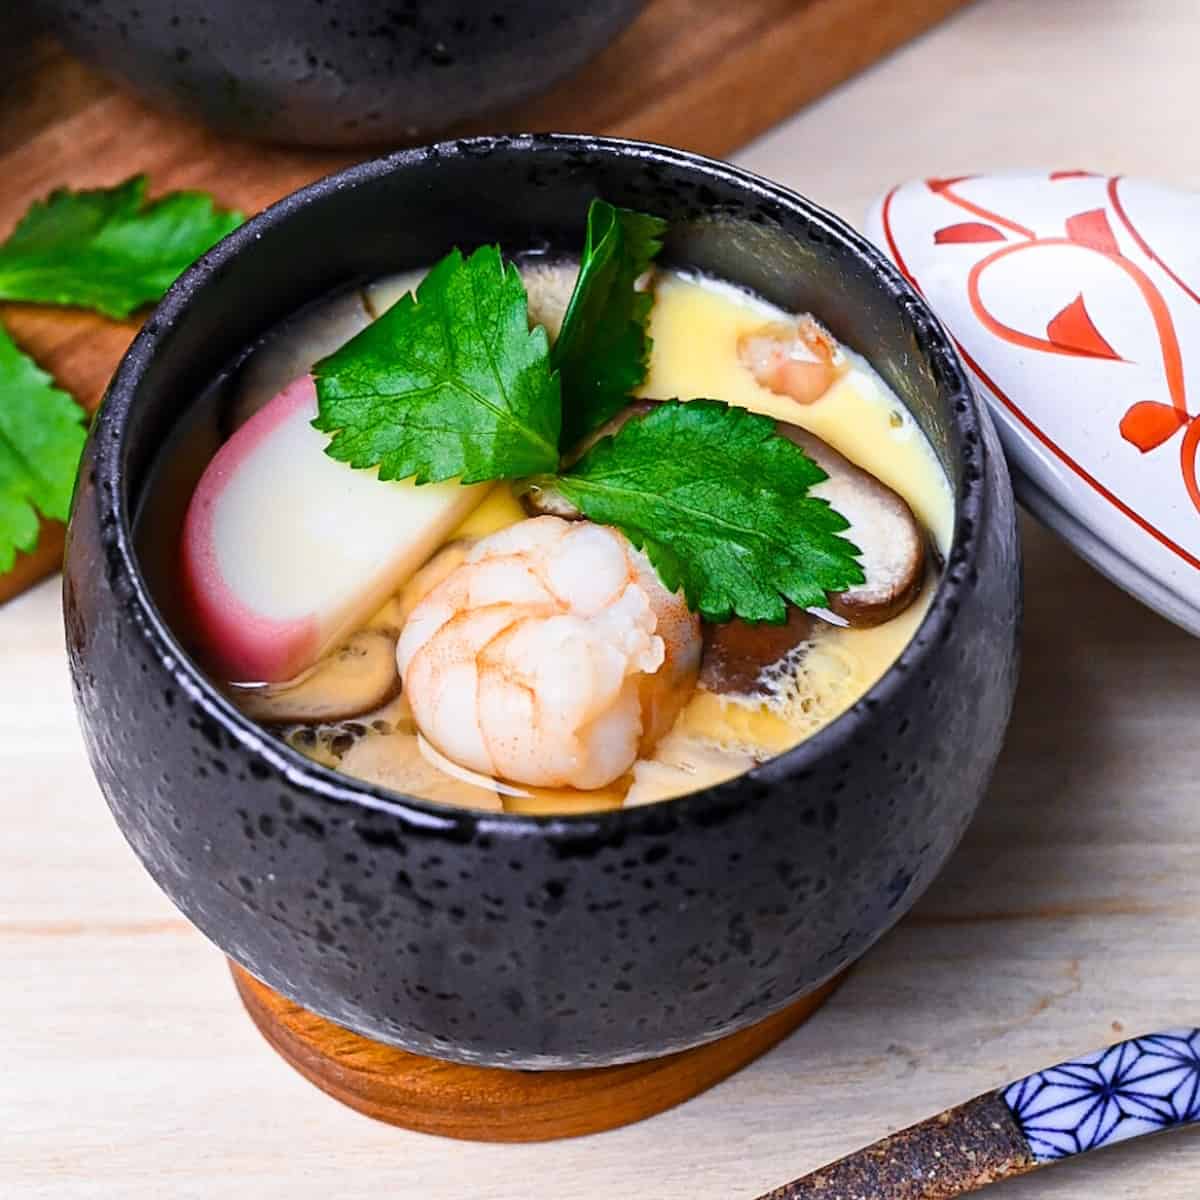 Chawanmushi (Japanese steamed egg custard) in black steaming cups with white and red decorative lids